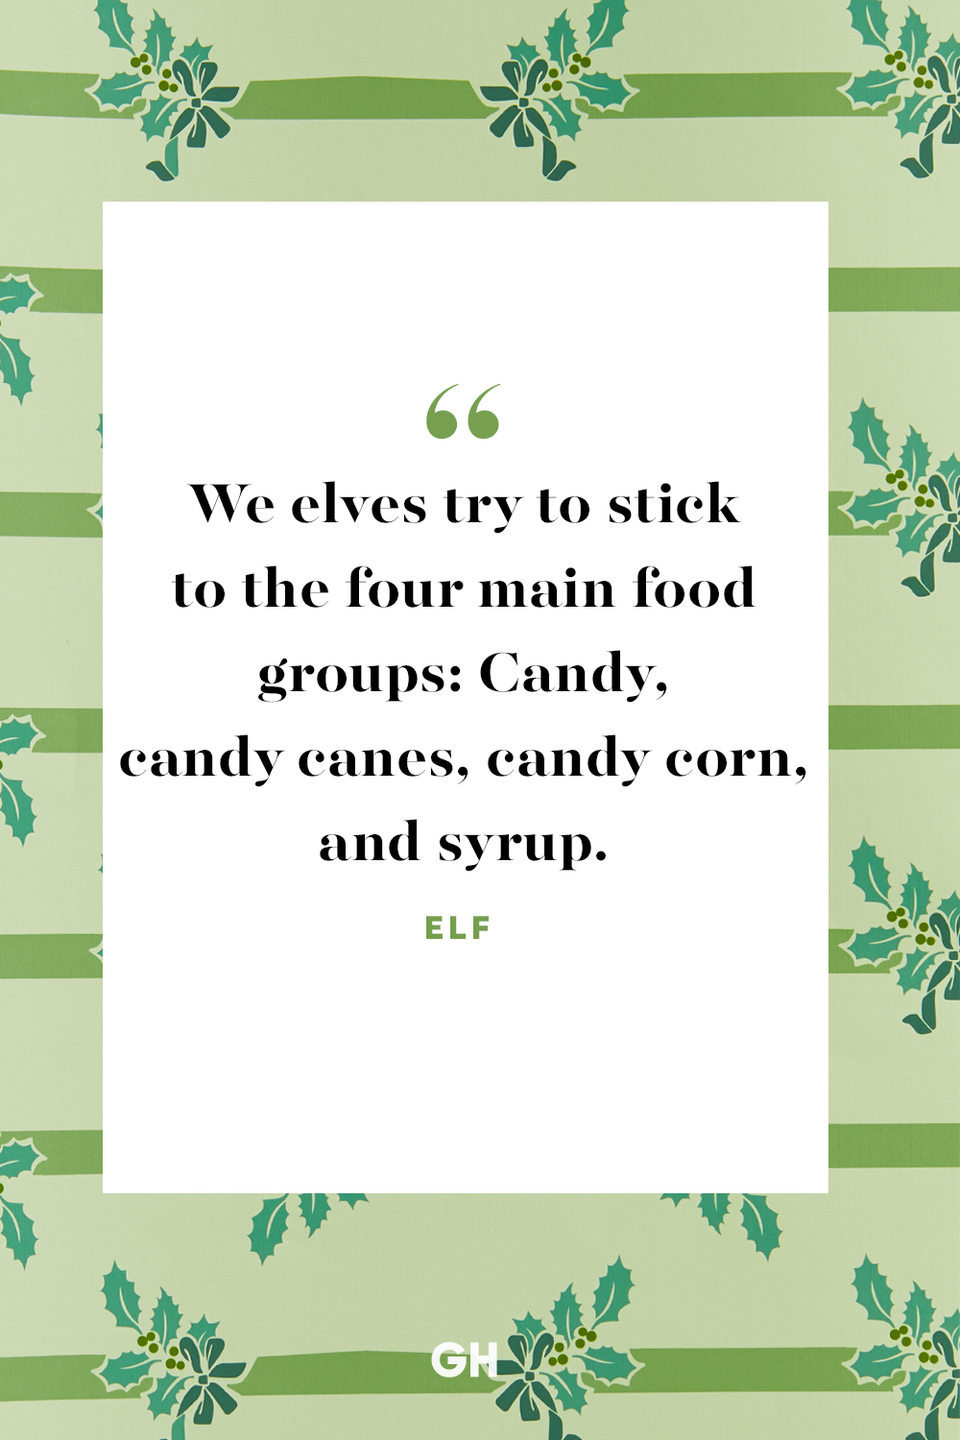 <p>We elves try to stick to the four main food groups: Candy, candy canes, candy corn, and syrup.</p>